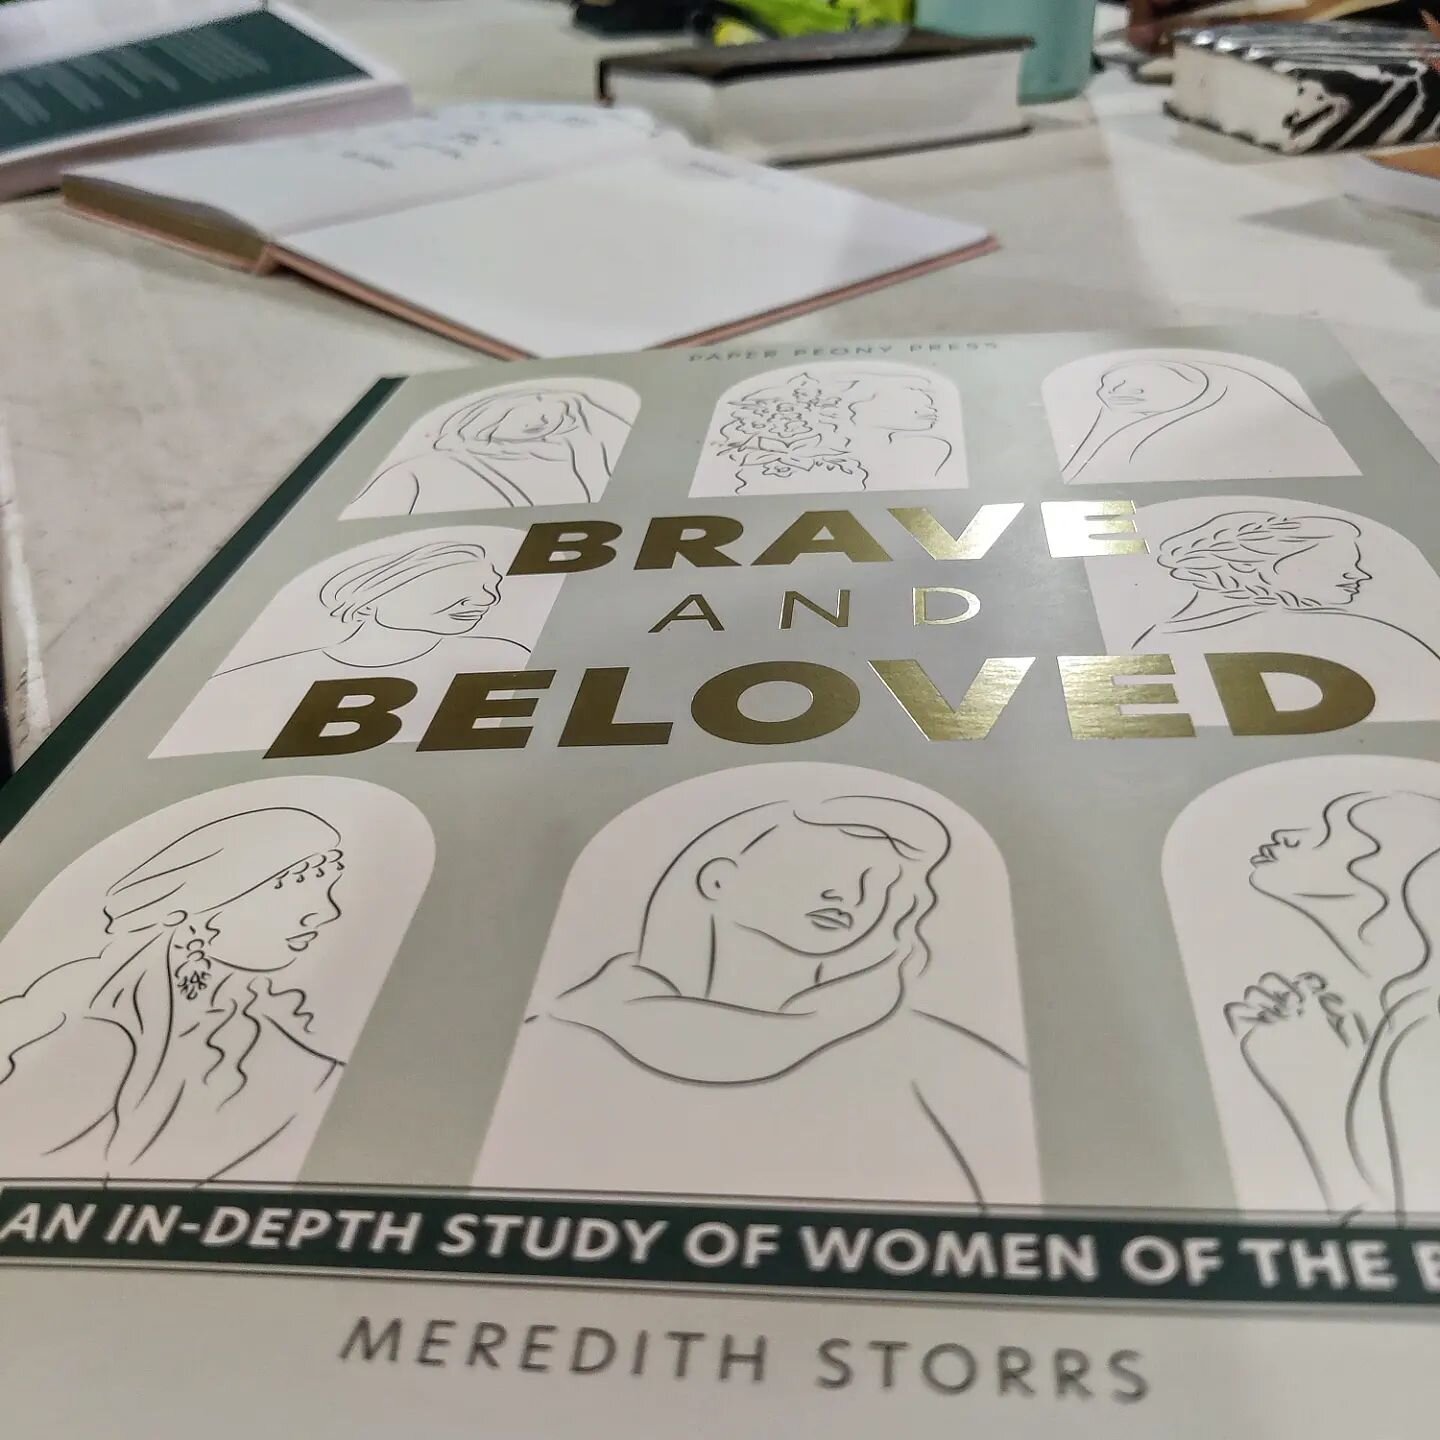 Every Sunday we gather as a group for our devotional time, and we are currently on week 2 of our new series: Brave and Beloved, an in-depth study of women of the Bible. We are just getting started, and it's already been eye-opening and transformation